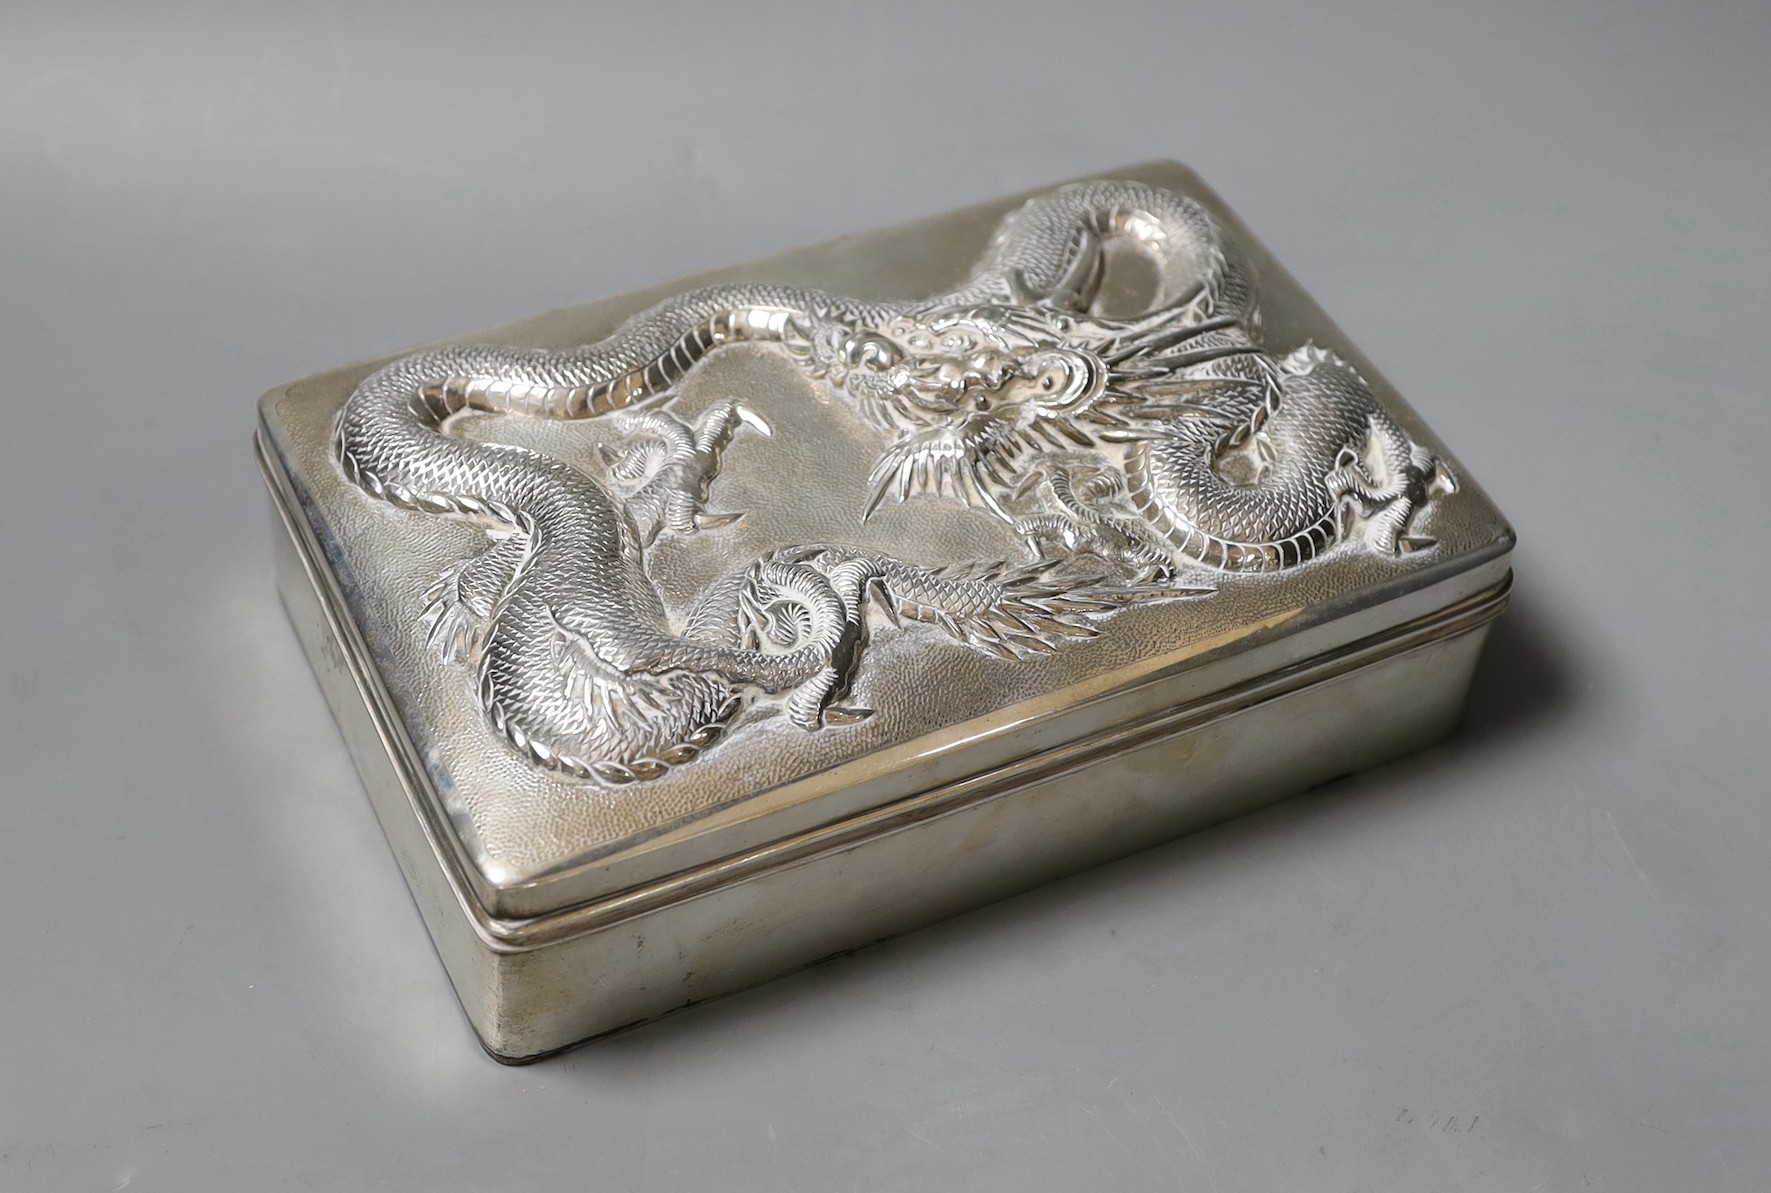 A Chinese Export white metal mounted cigarette box, by Wang Hing, Hong Kong, the lid decorated with a dragon, 21cm.